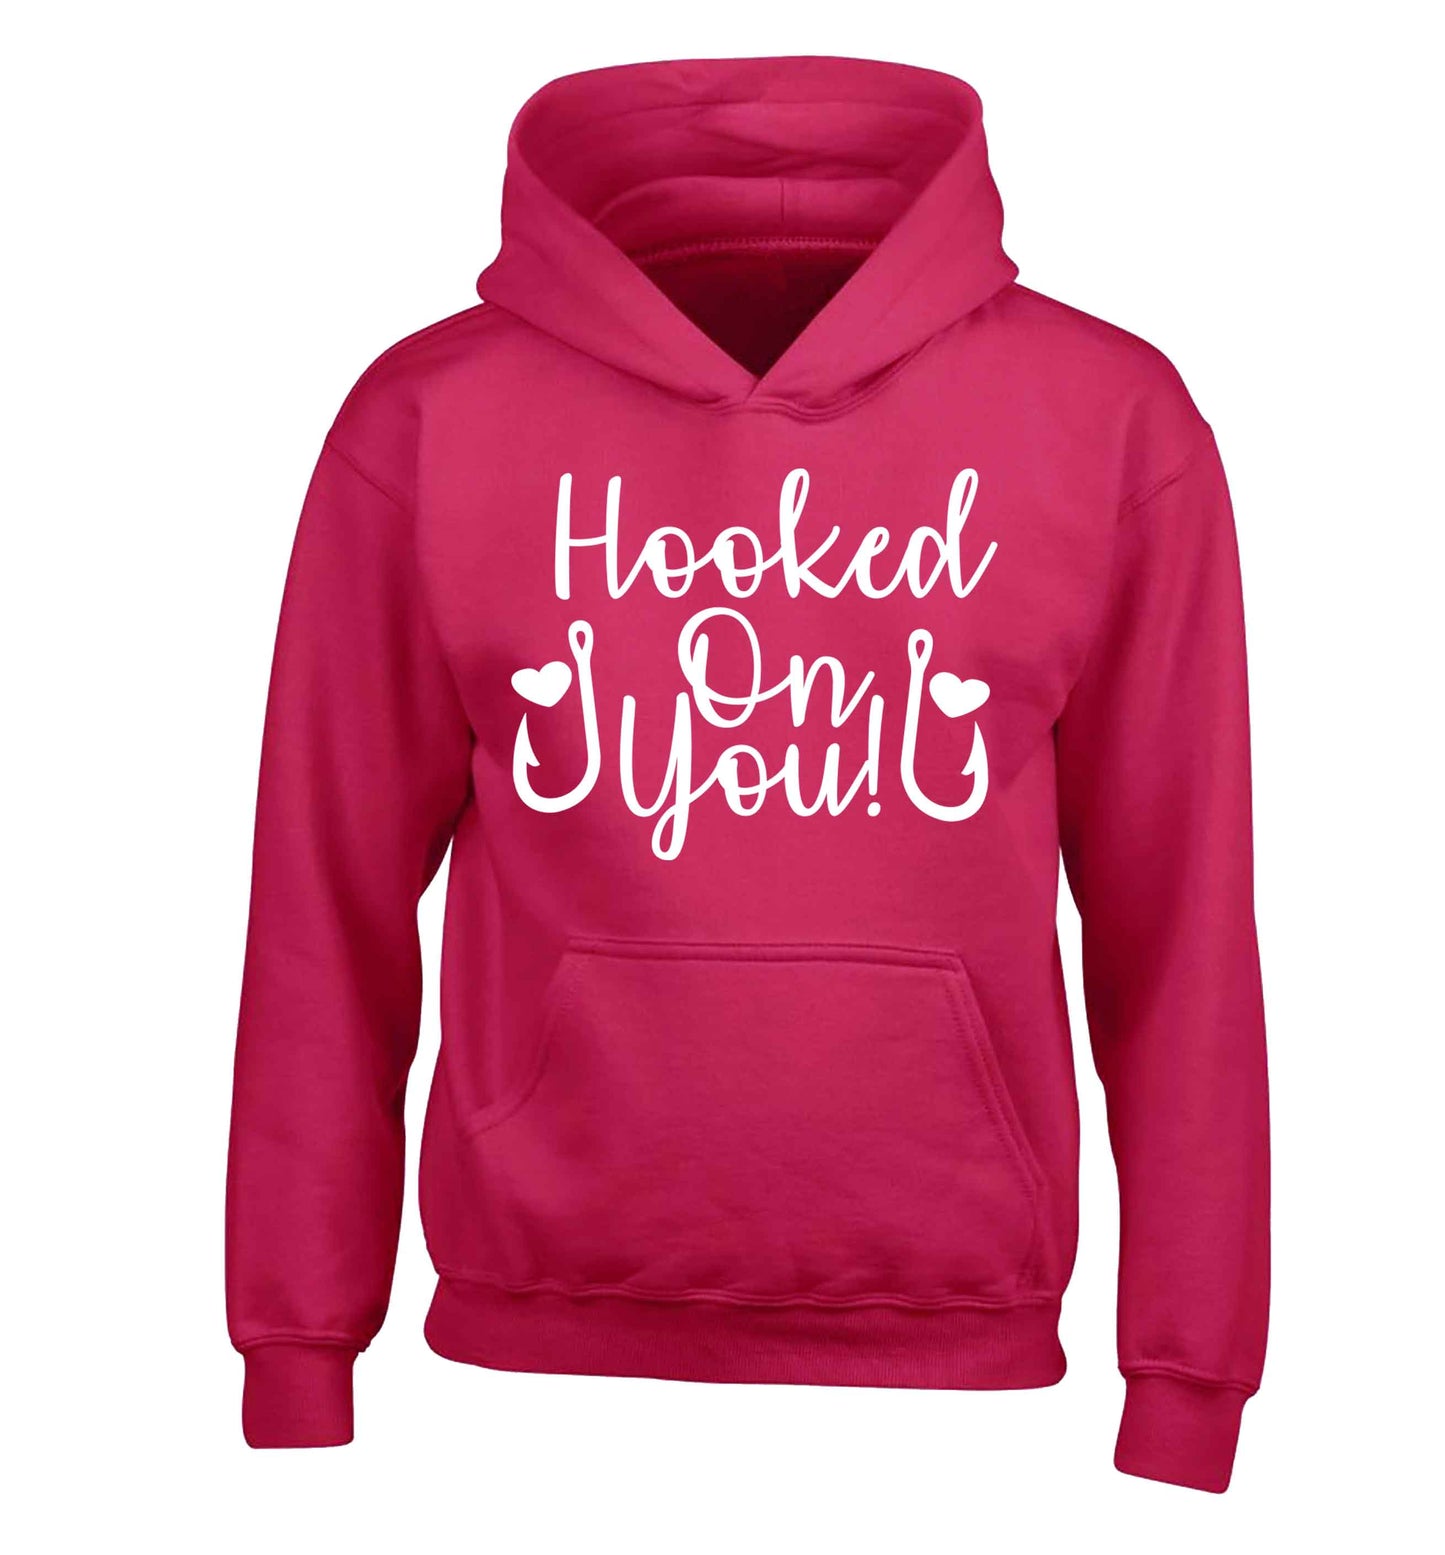 Hooked on you children's pink hoodie 12-13 Years